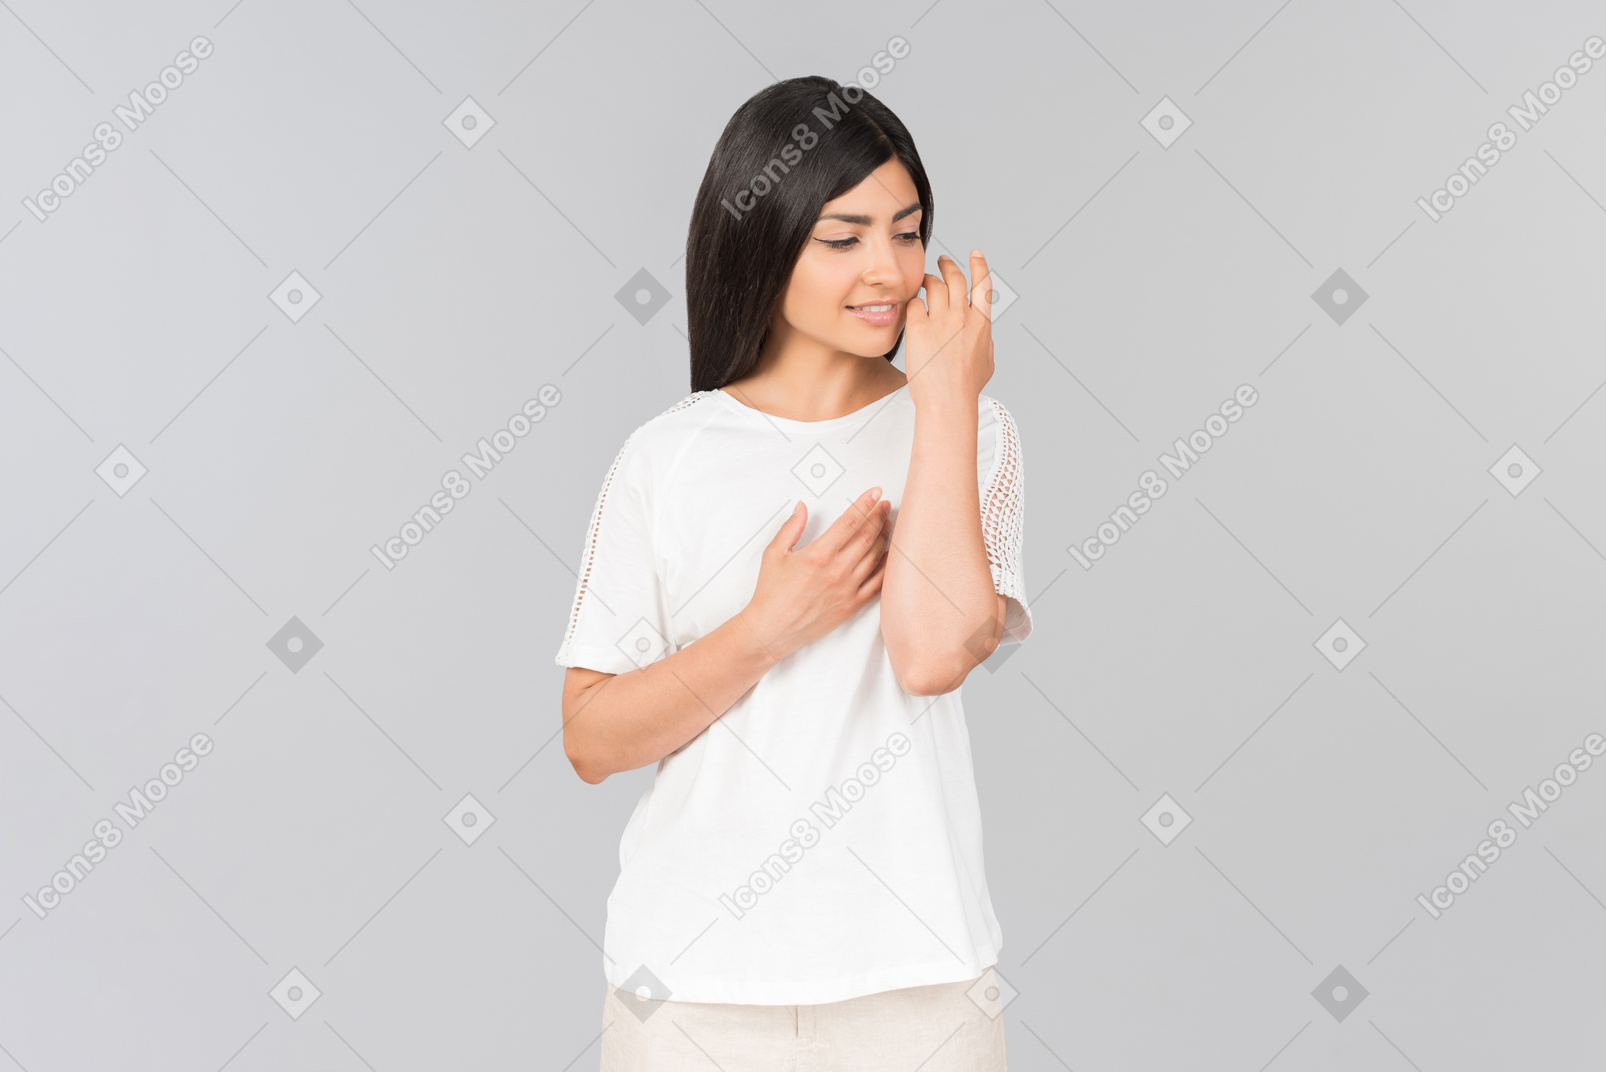 Dreamy indian girl touching her face with a hand